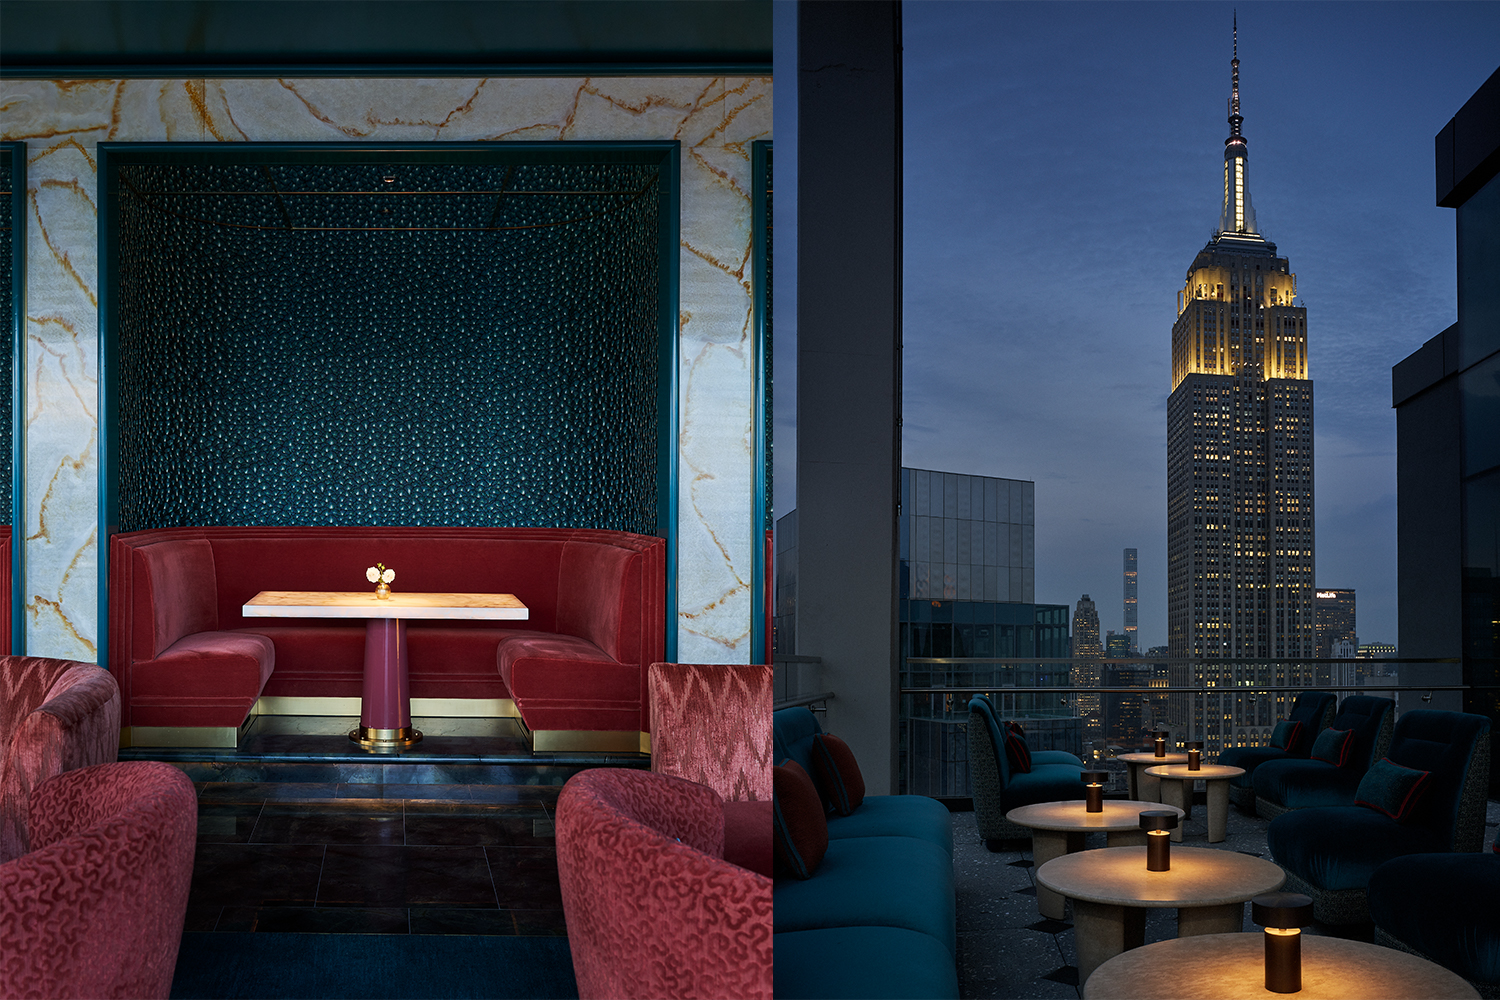 A plush booth at Nubeluz (left) and the view from an outdoor terrace at the Empire State Building at dusk